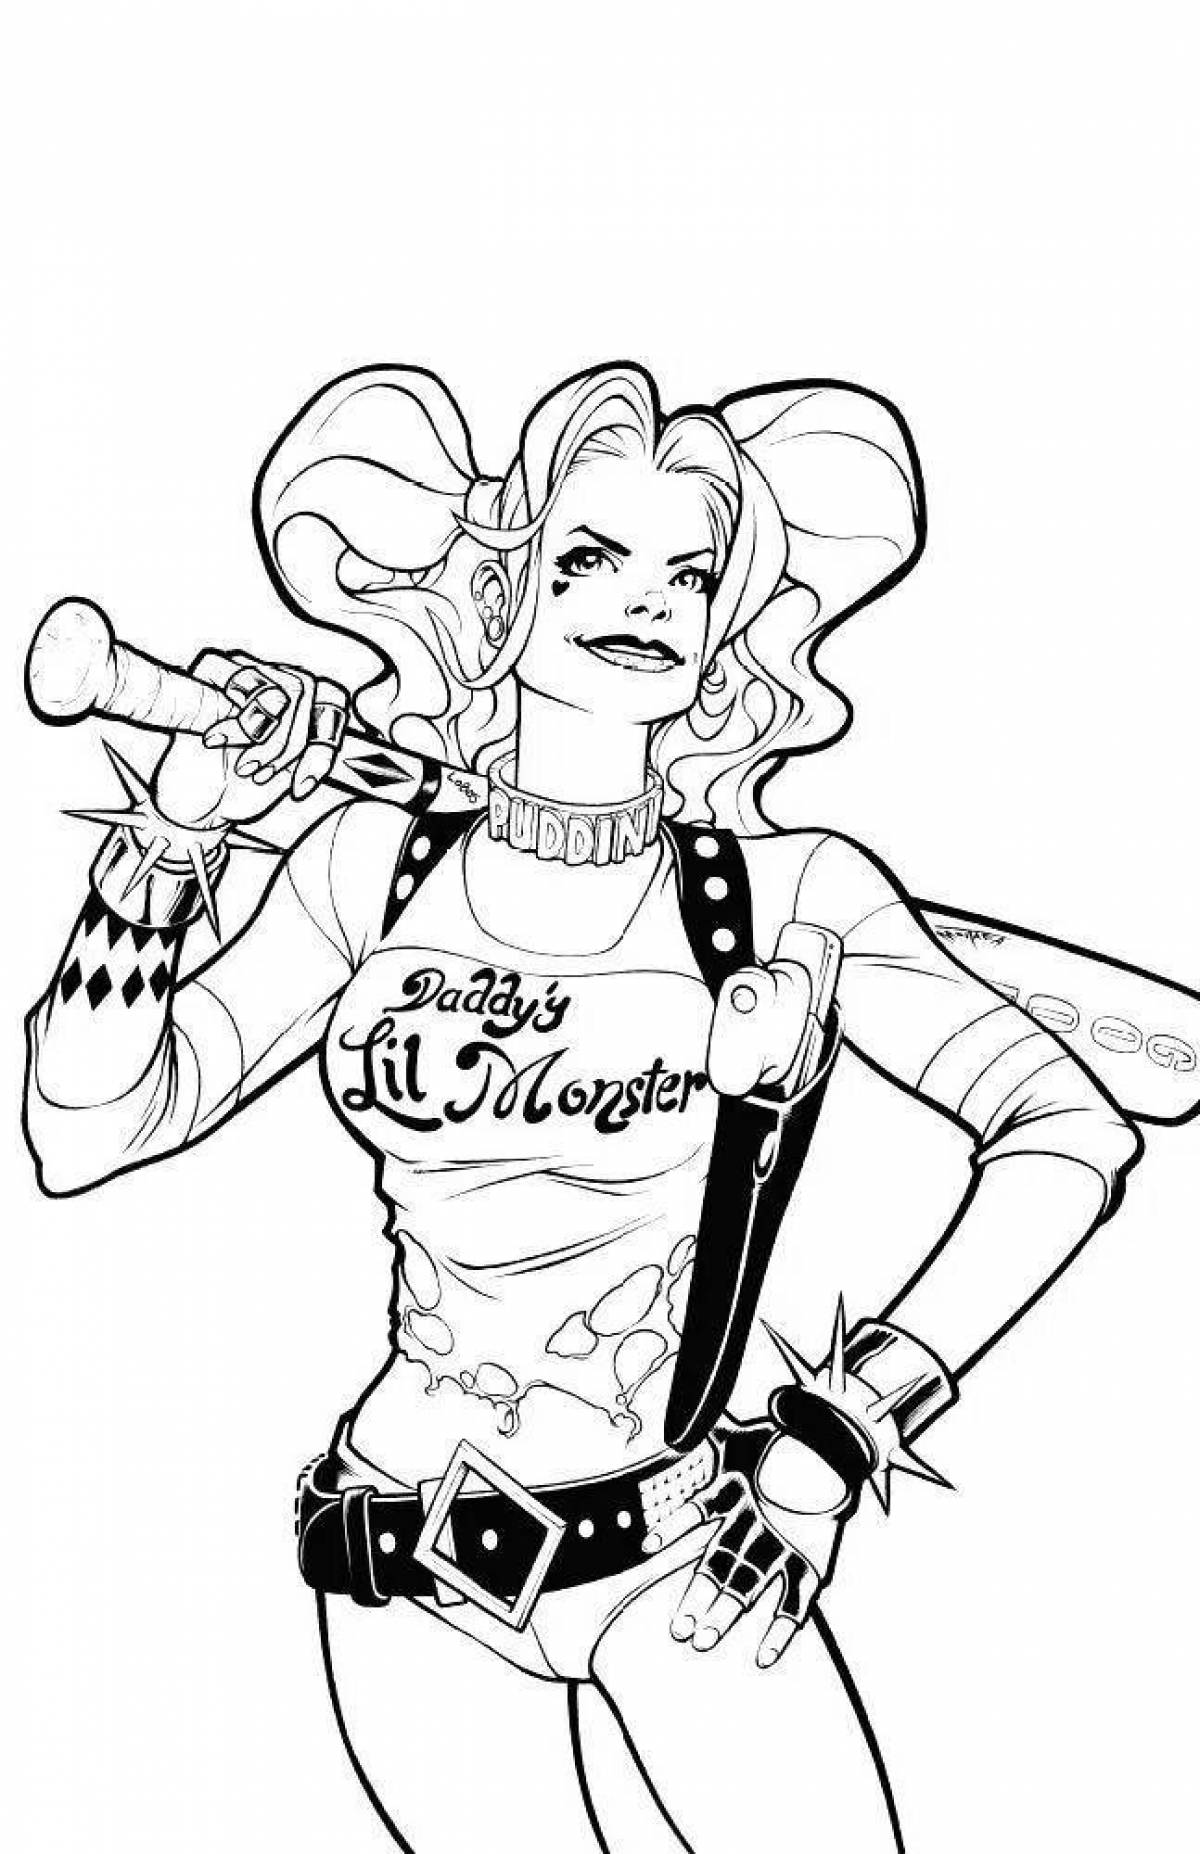 Gorgeous joker and harley quinn coloring book